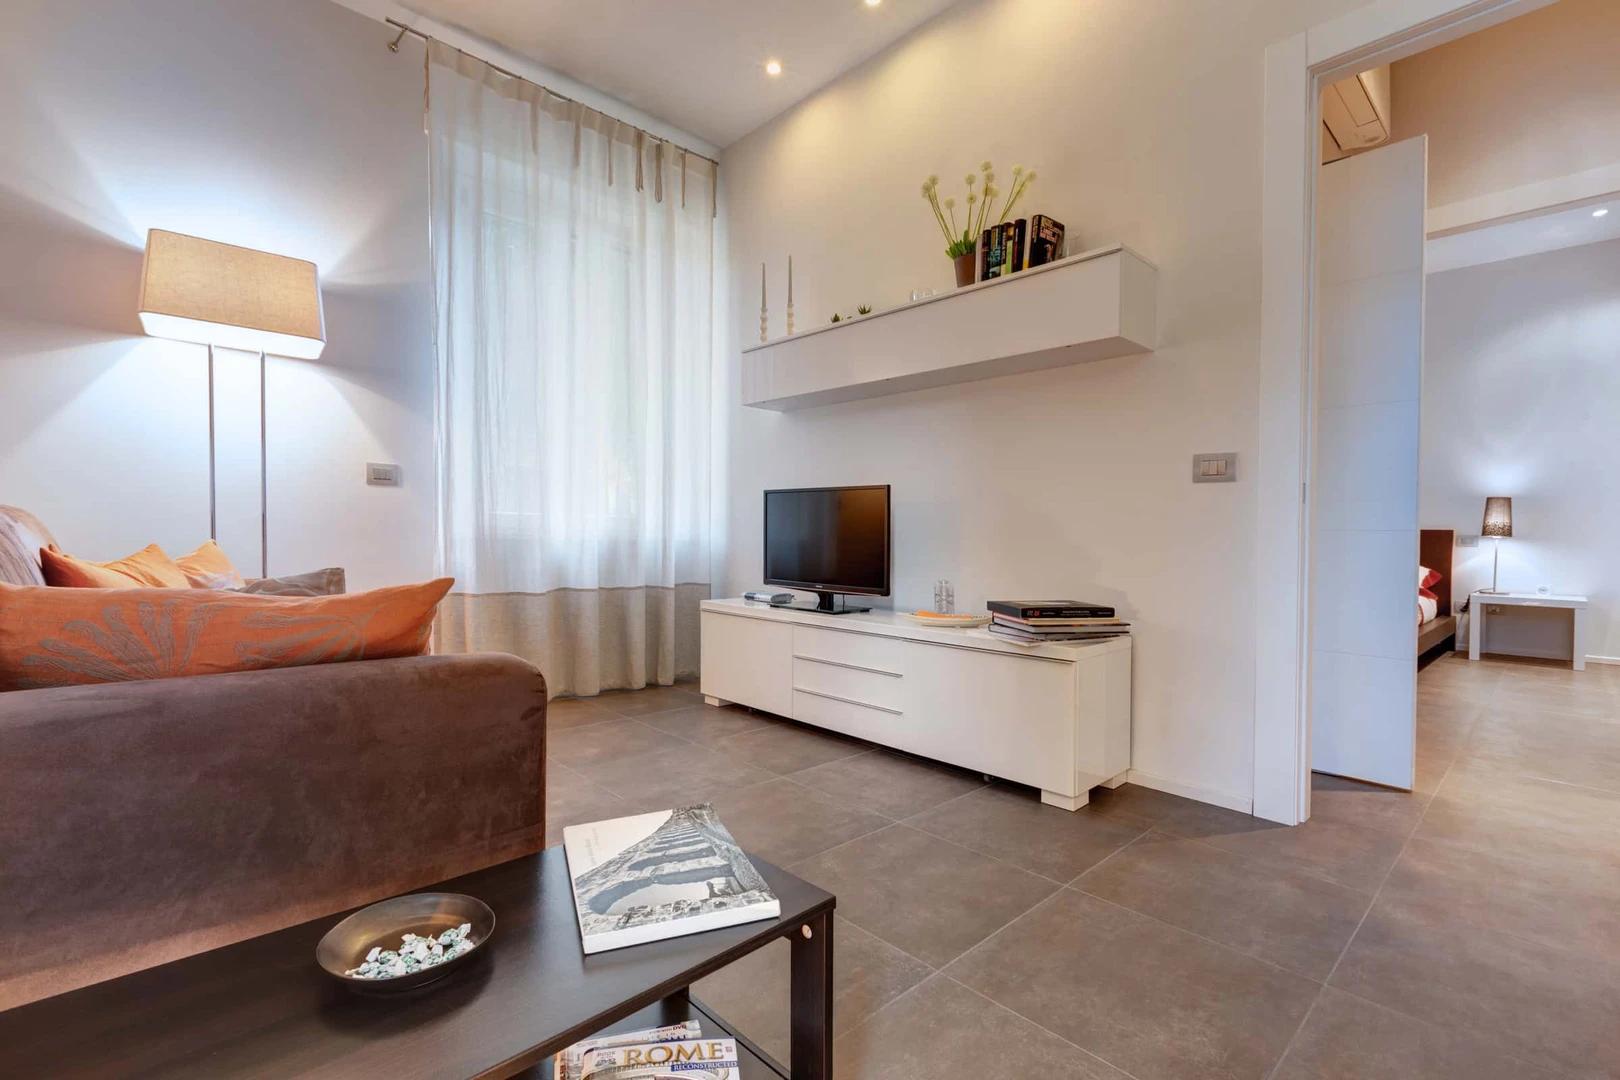 Accommodation in the centre of Rome